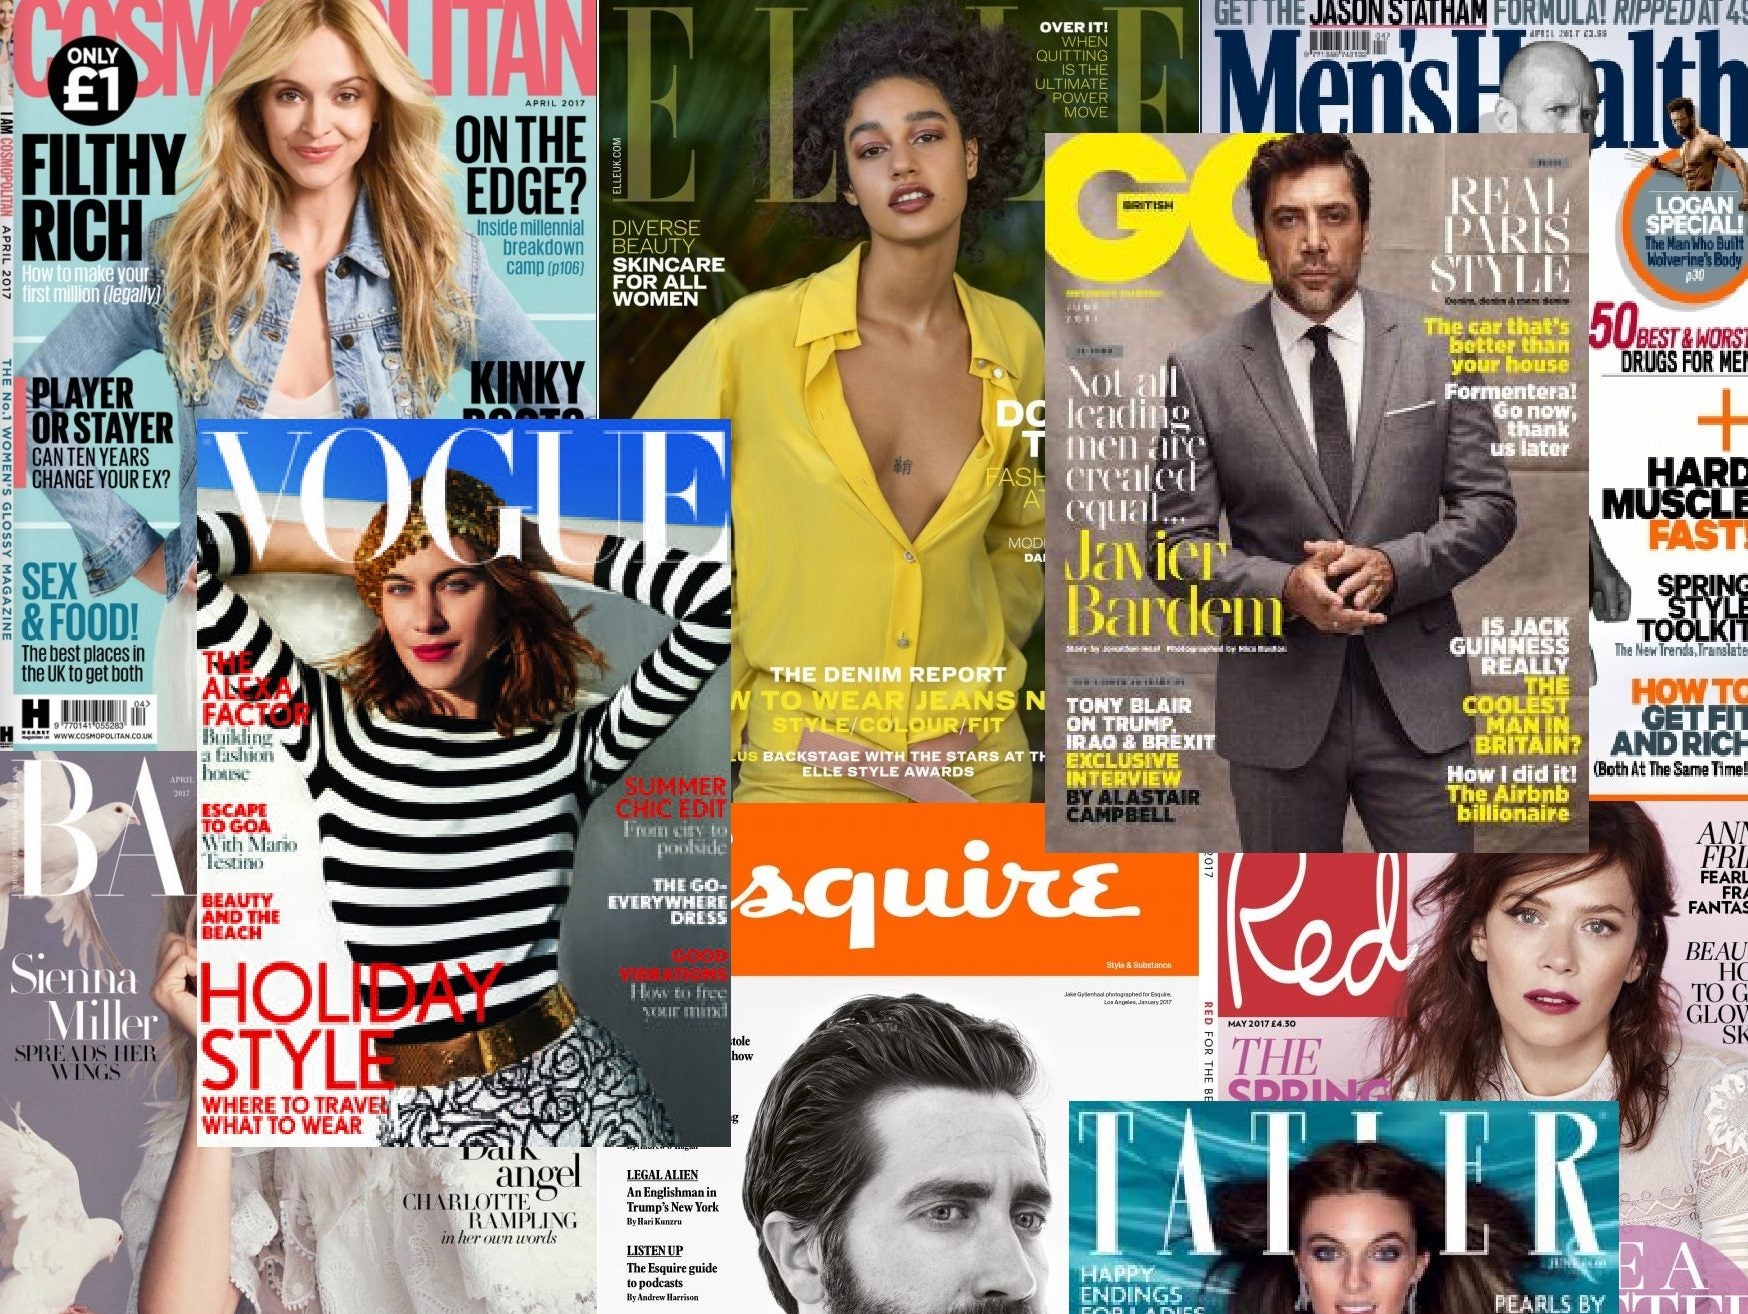 Are special editions the future of print for magazine brands?